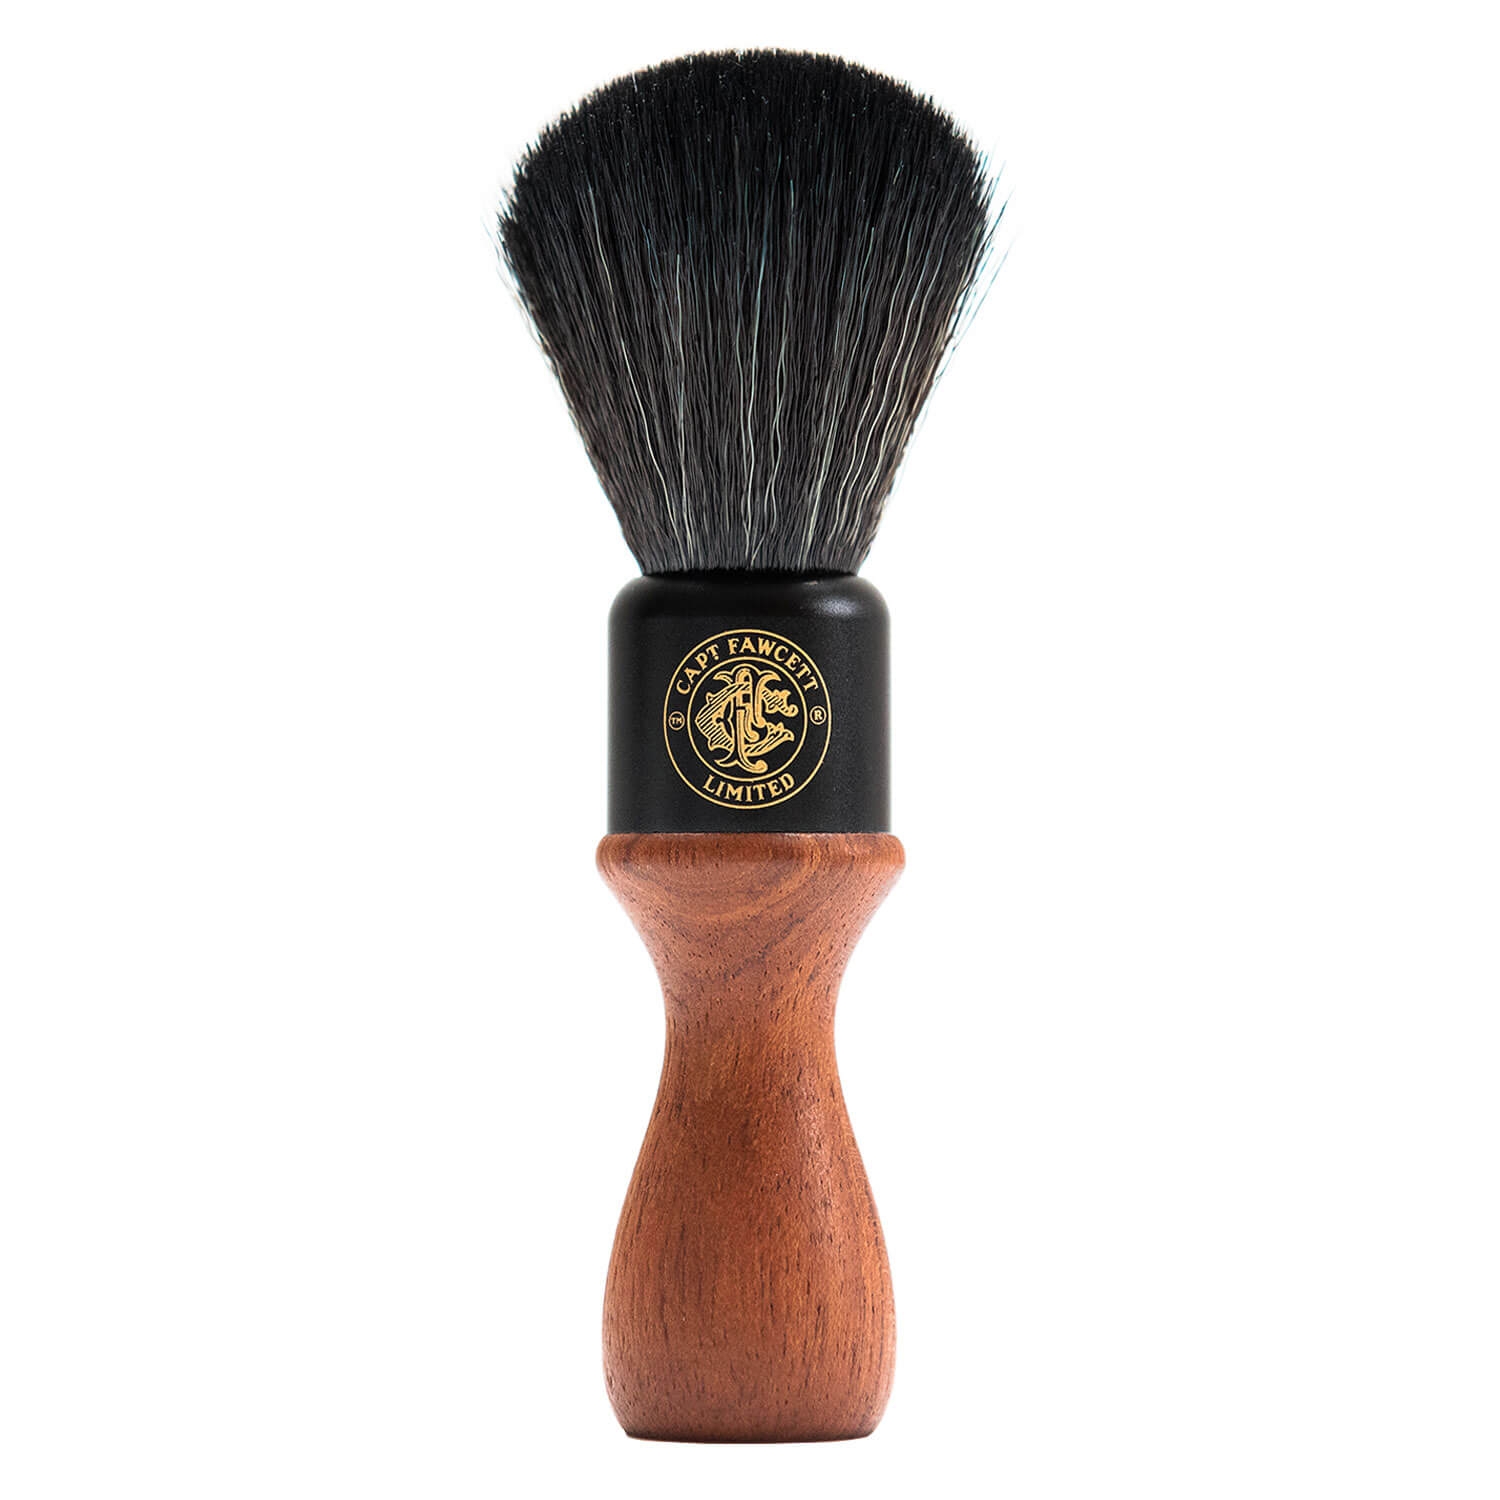 Product image from Capt. Fawcett Tools - Synthetic Fibre Shaving Brush